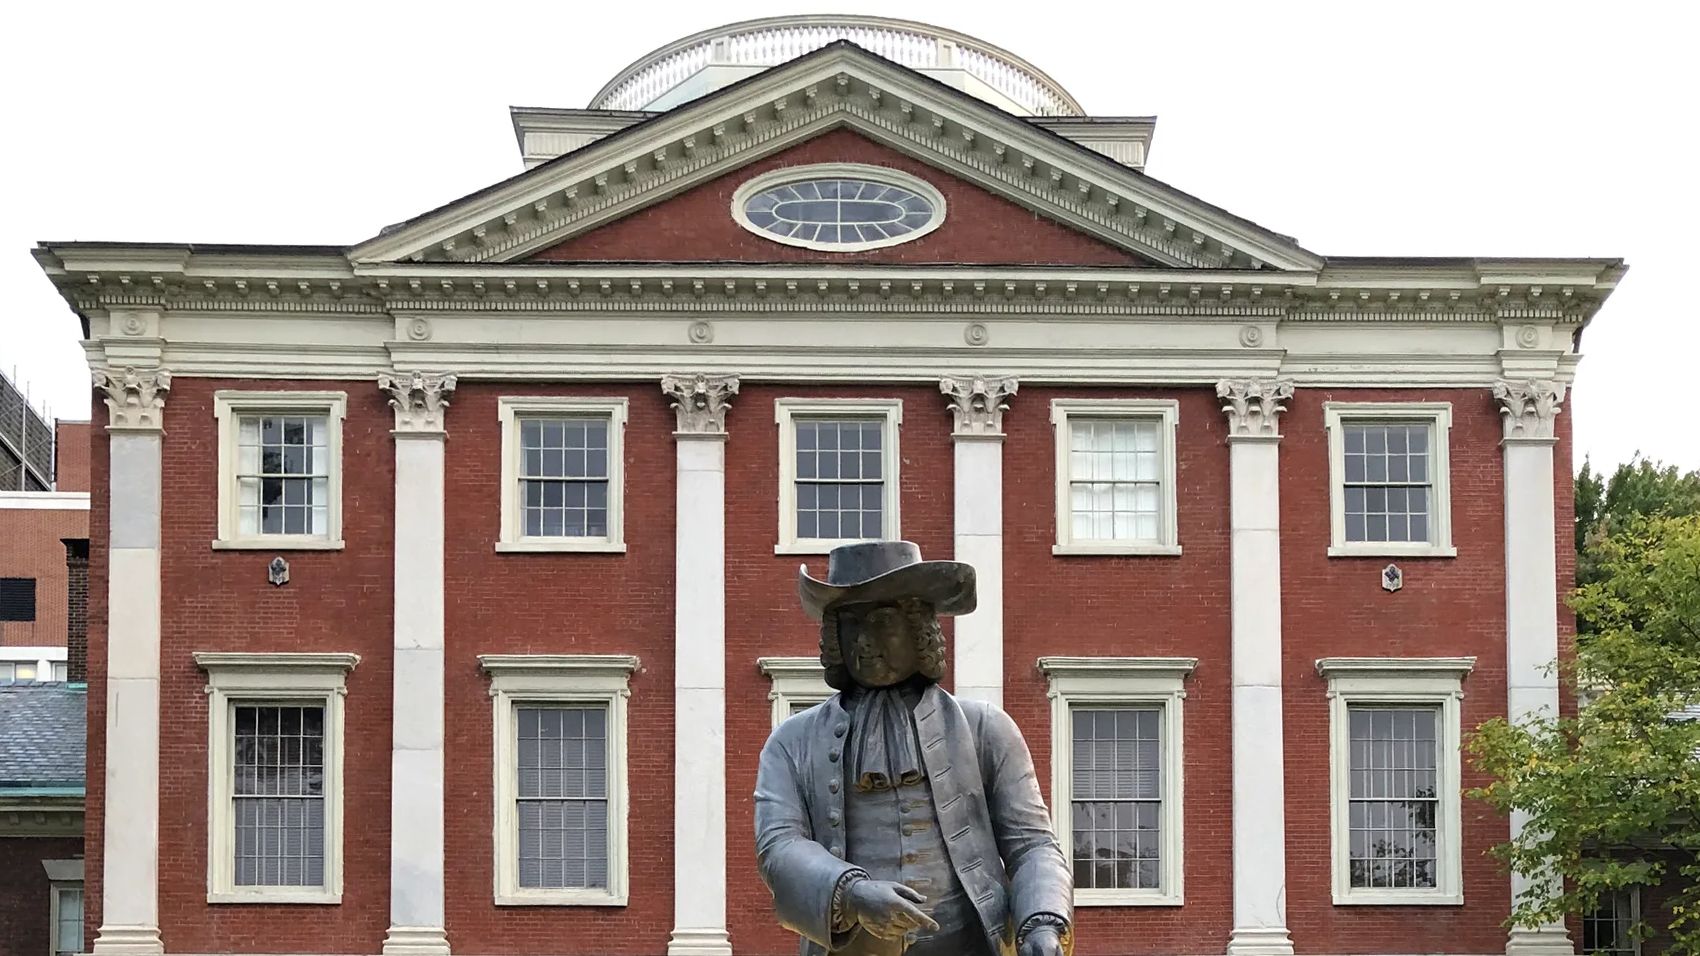 Main building of Pennsylvania hospital with statue of a man in front